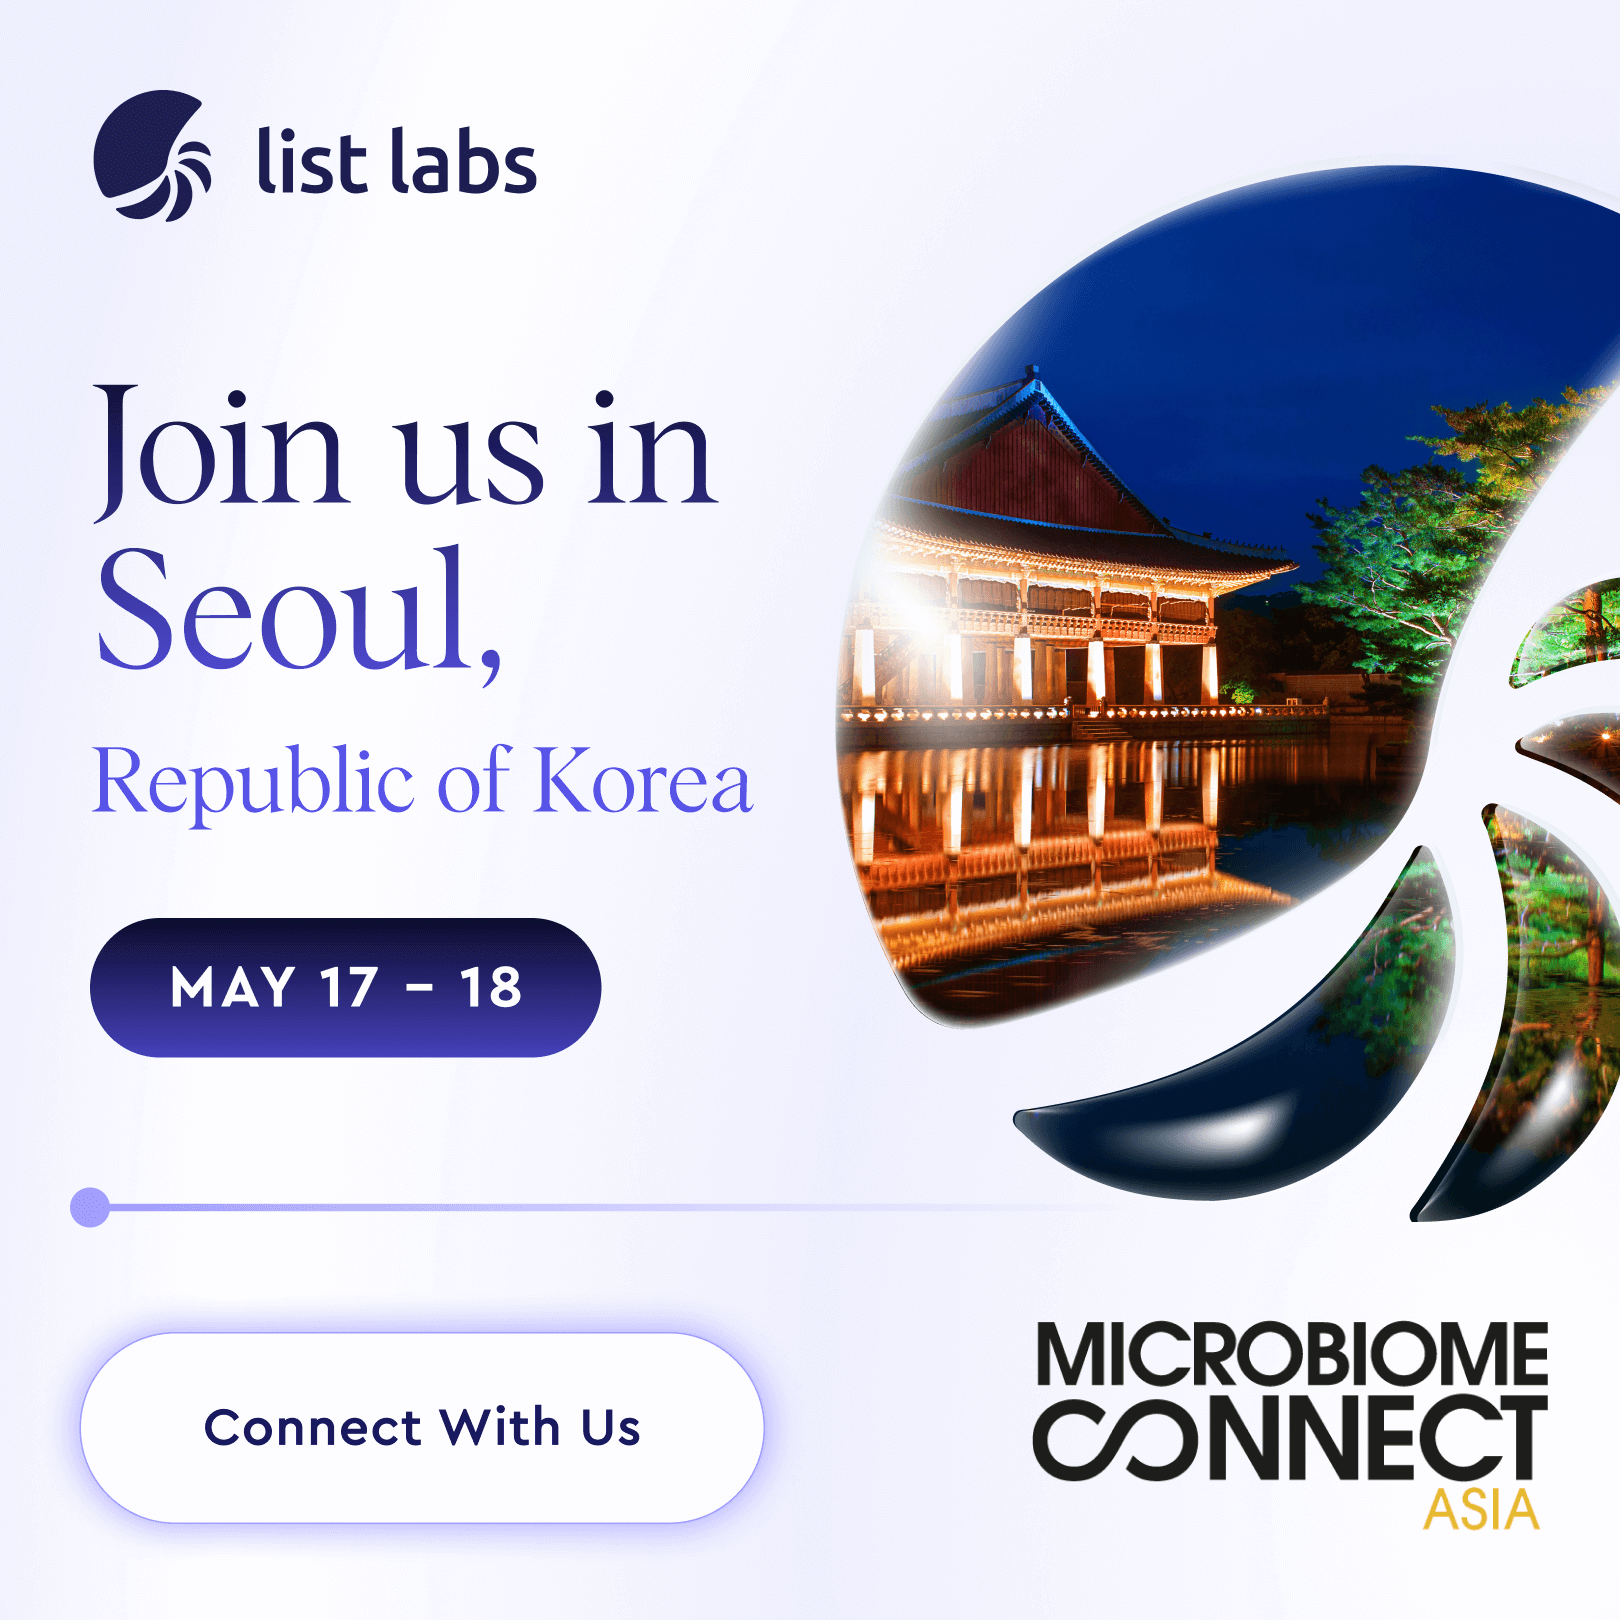 Microbiome Connect Asia